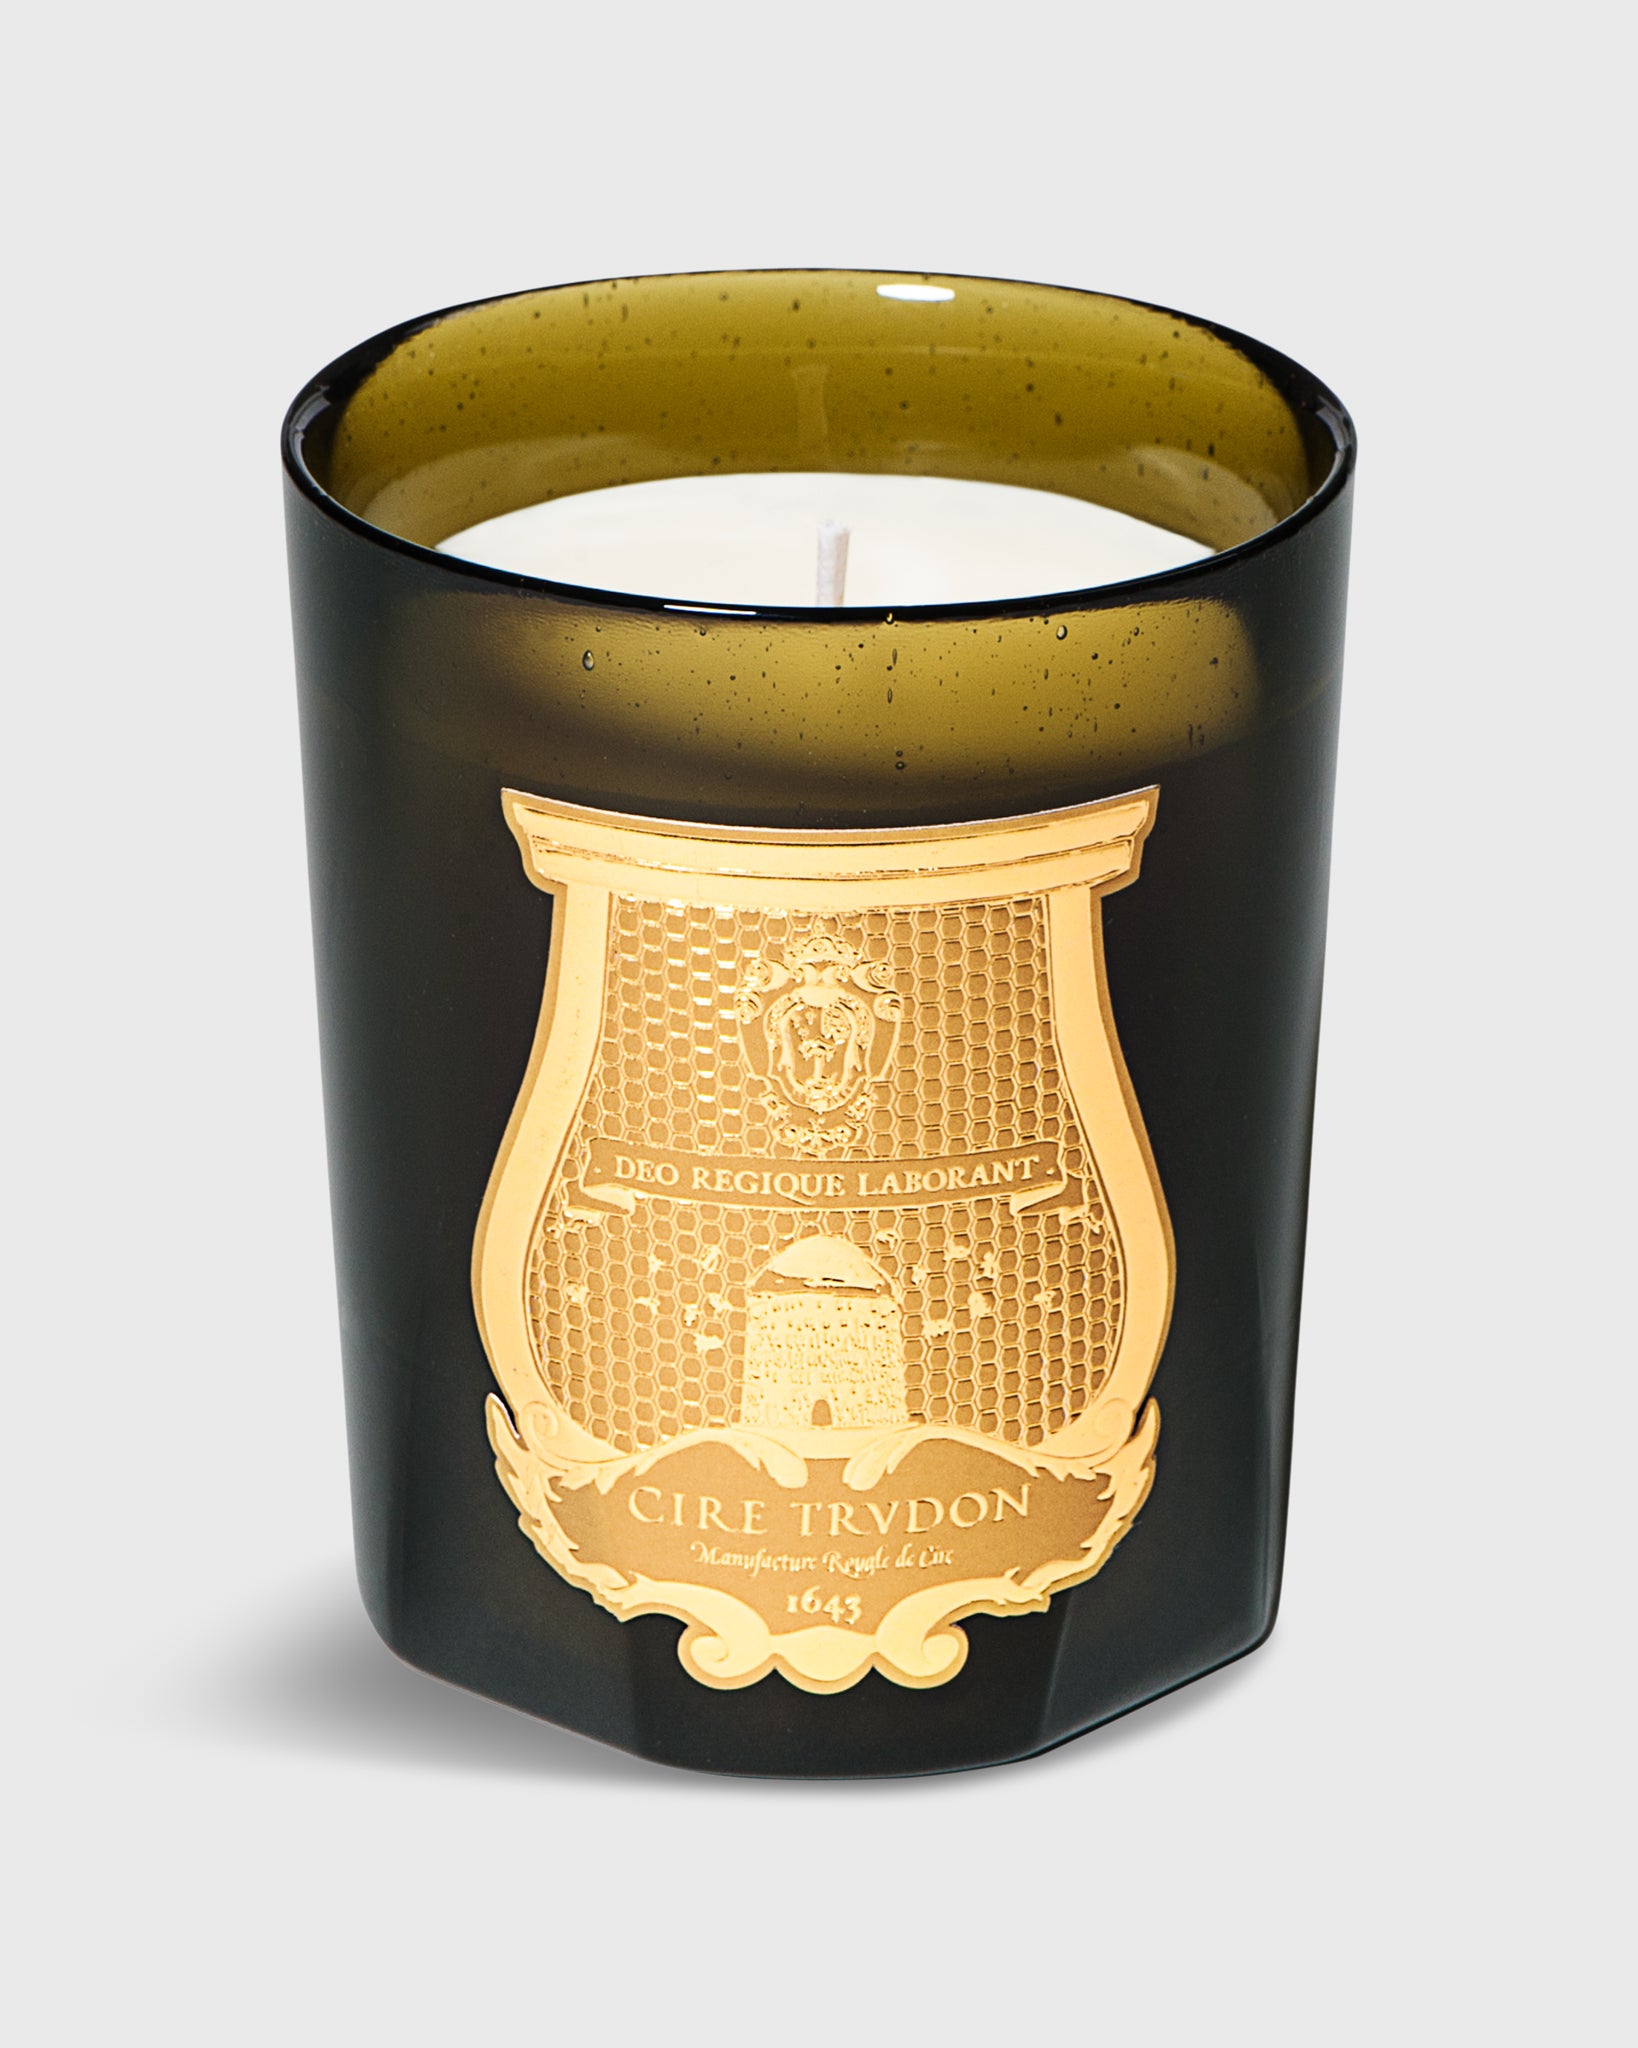 Classic Scented Candle Abd El Kader